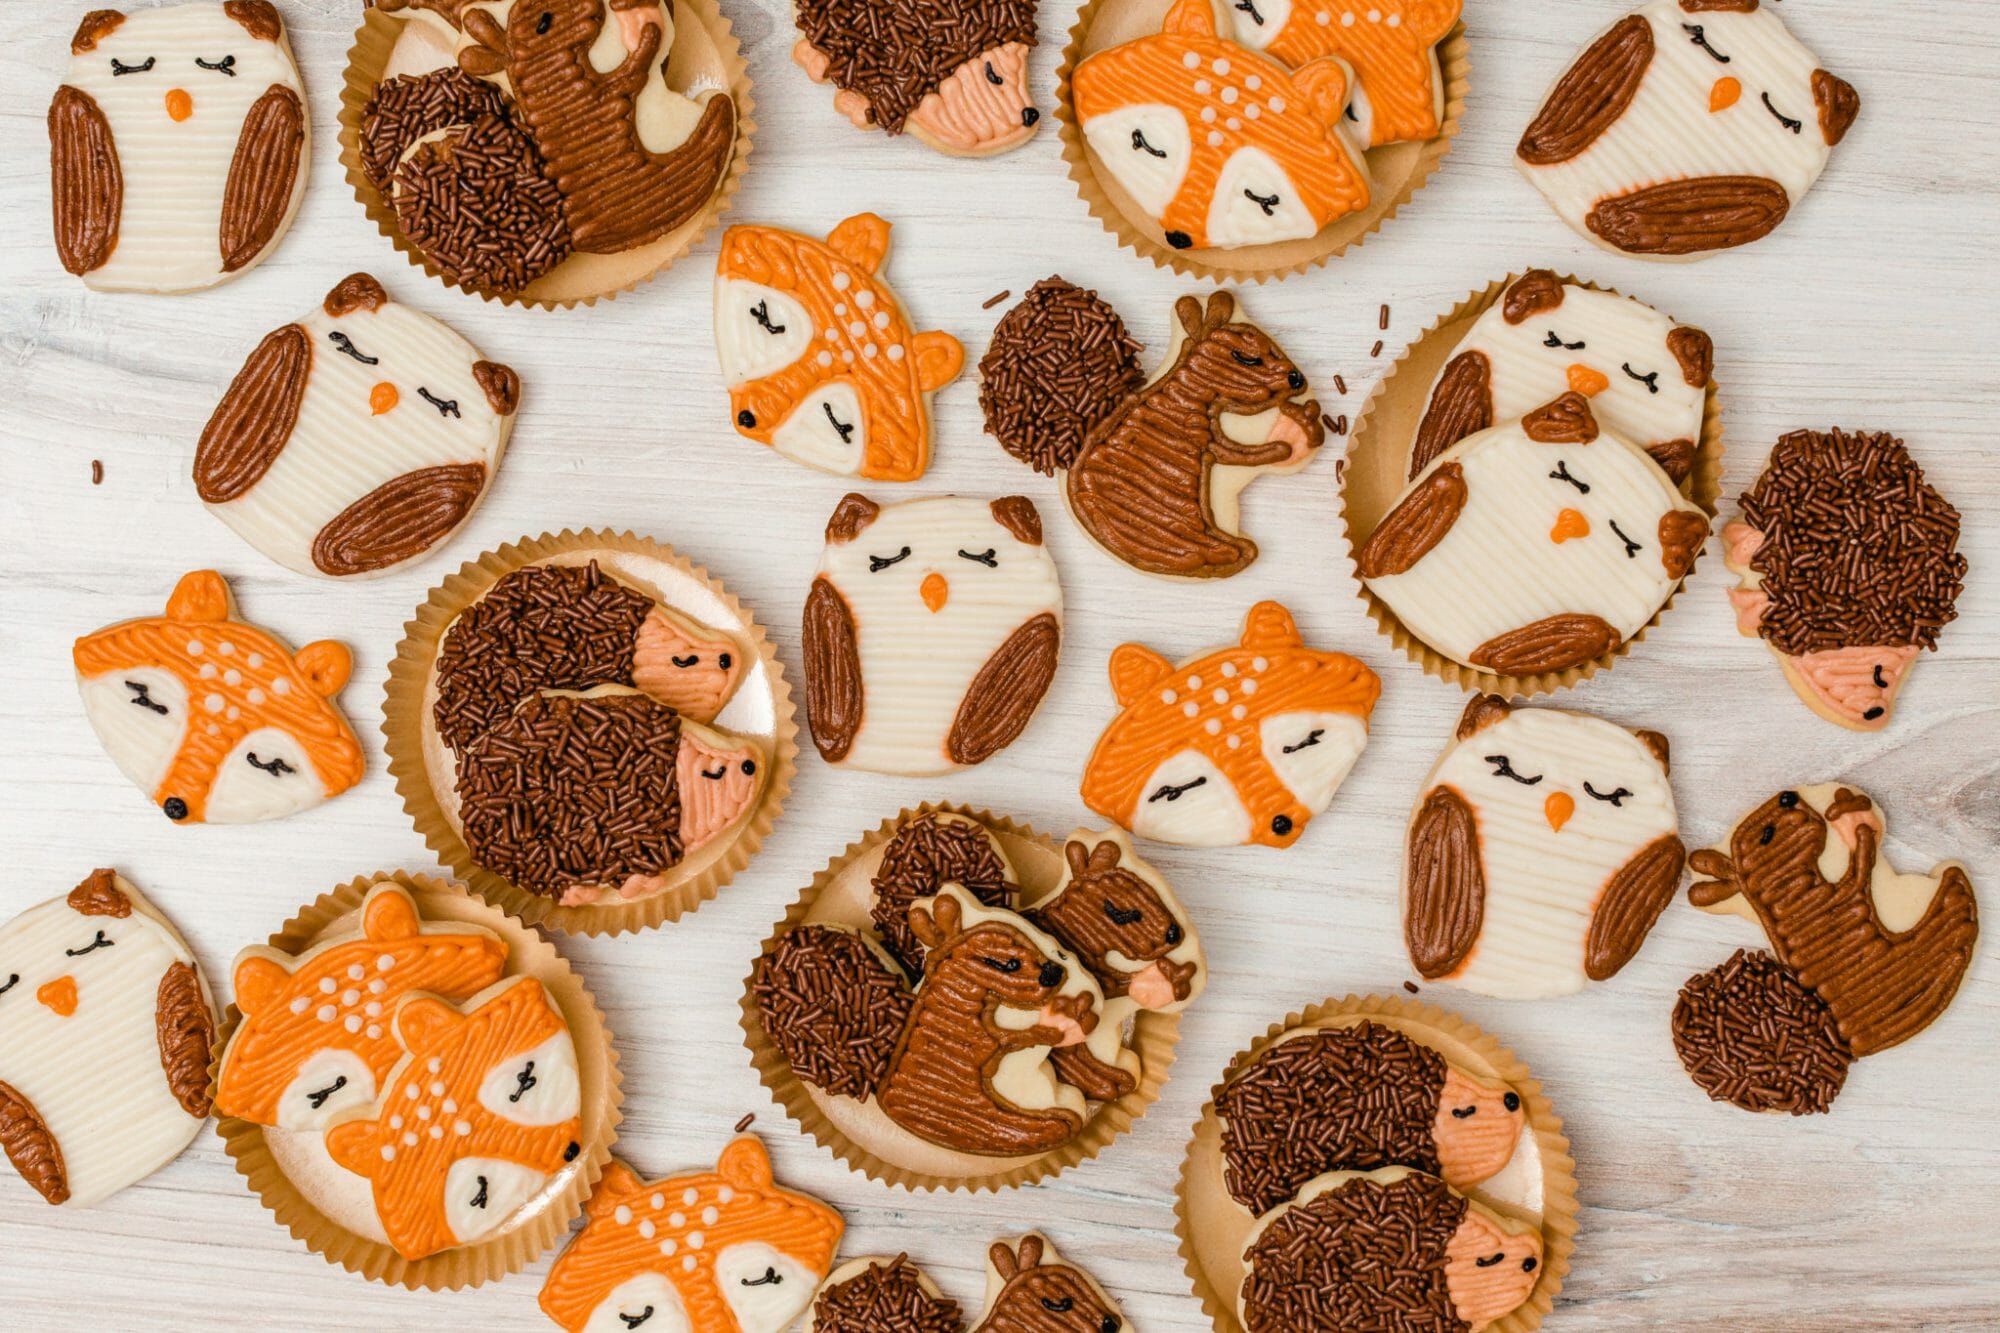 How To Decorate Woodland Animal Sugar Cookies